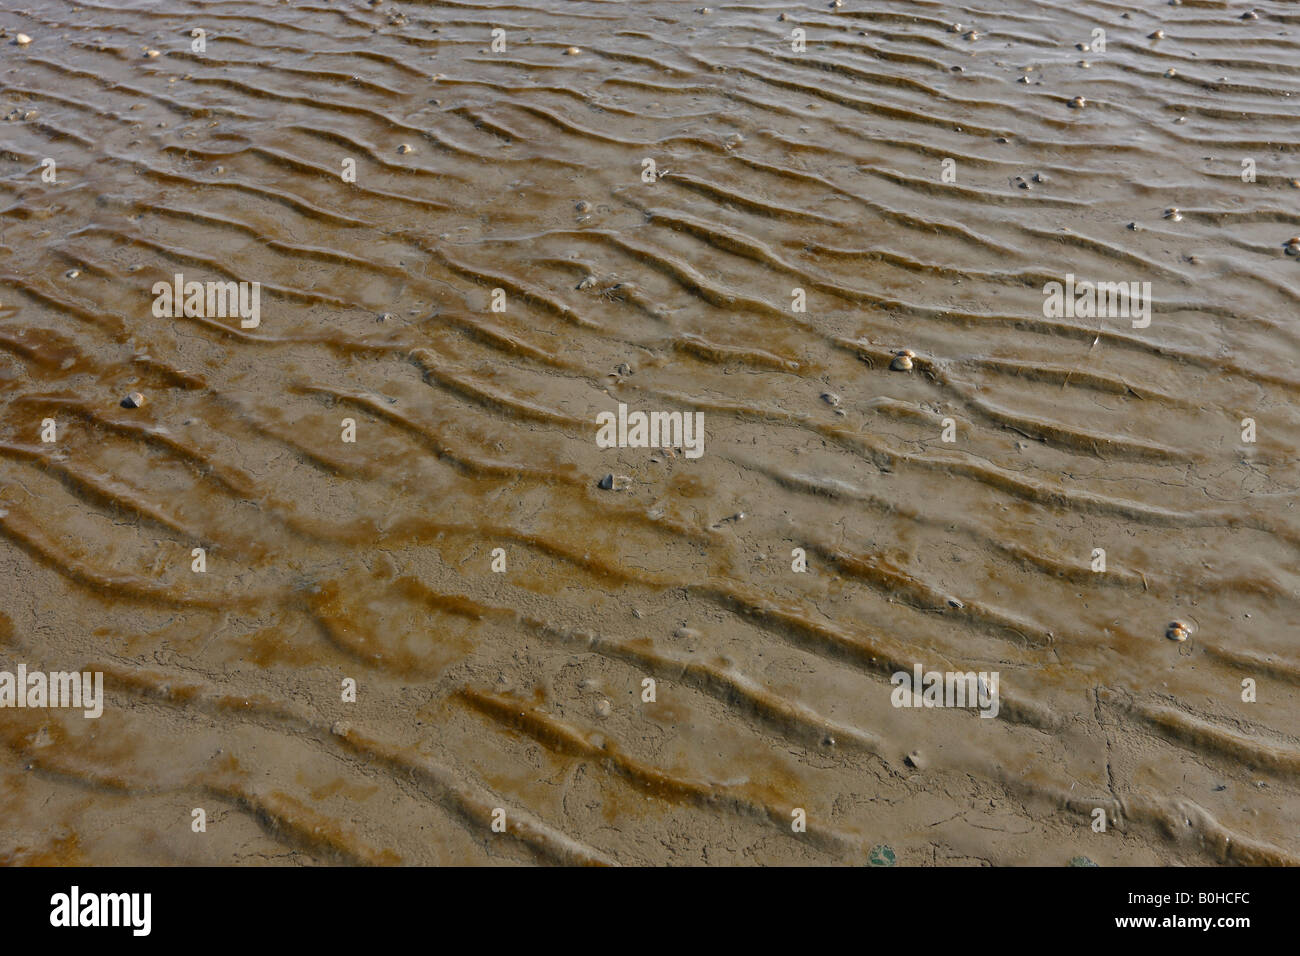 Ripples in the mud of the tidal flats of the Wattenmeer, Wadden Sea, Eckwarden, Lower Saxony, Germany, Europe Stock Photo